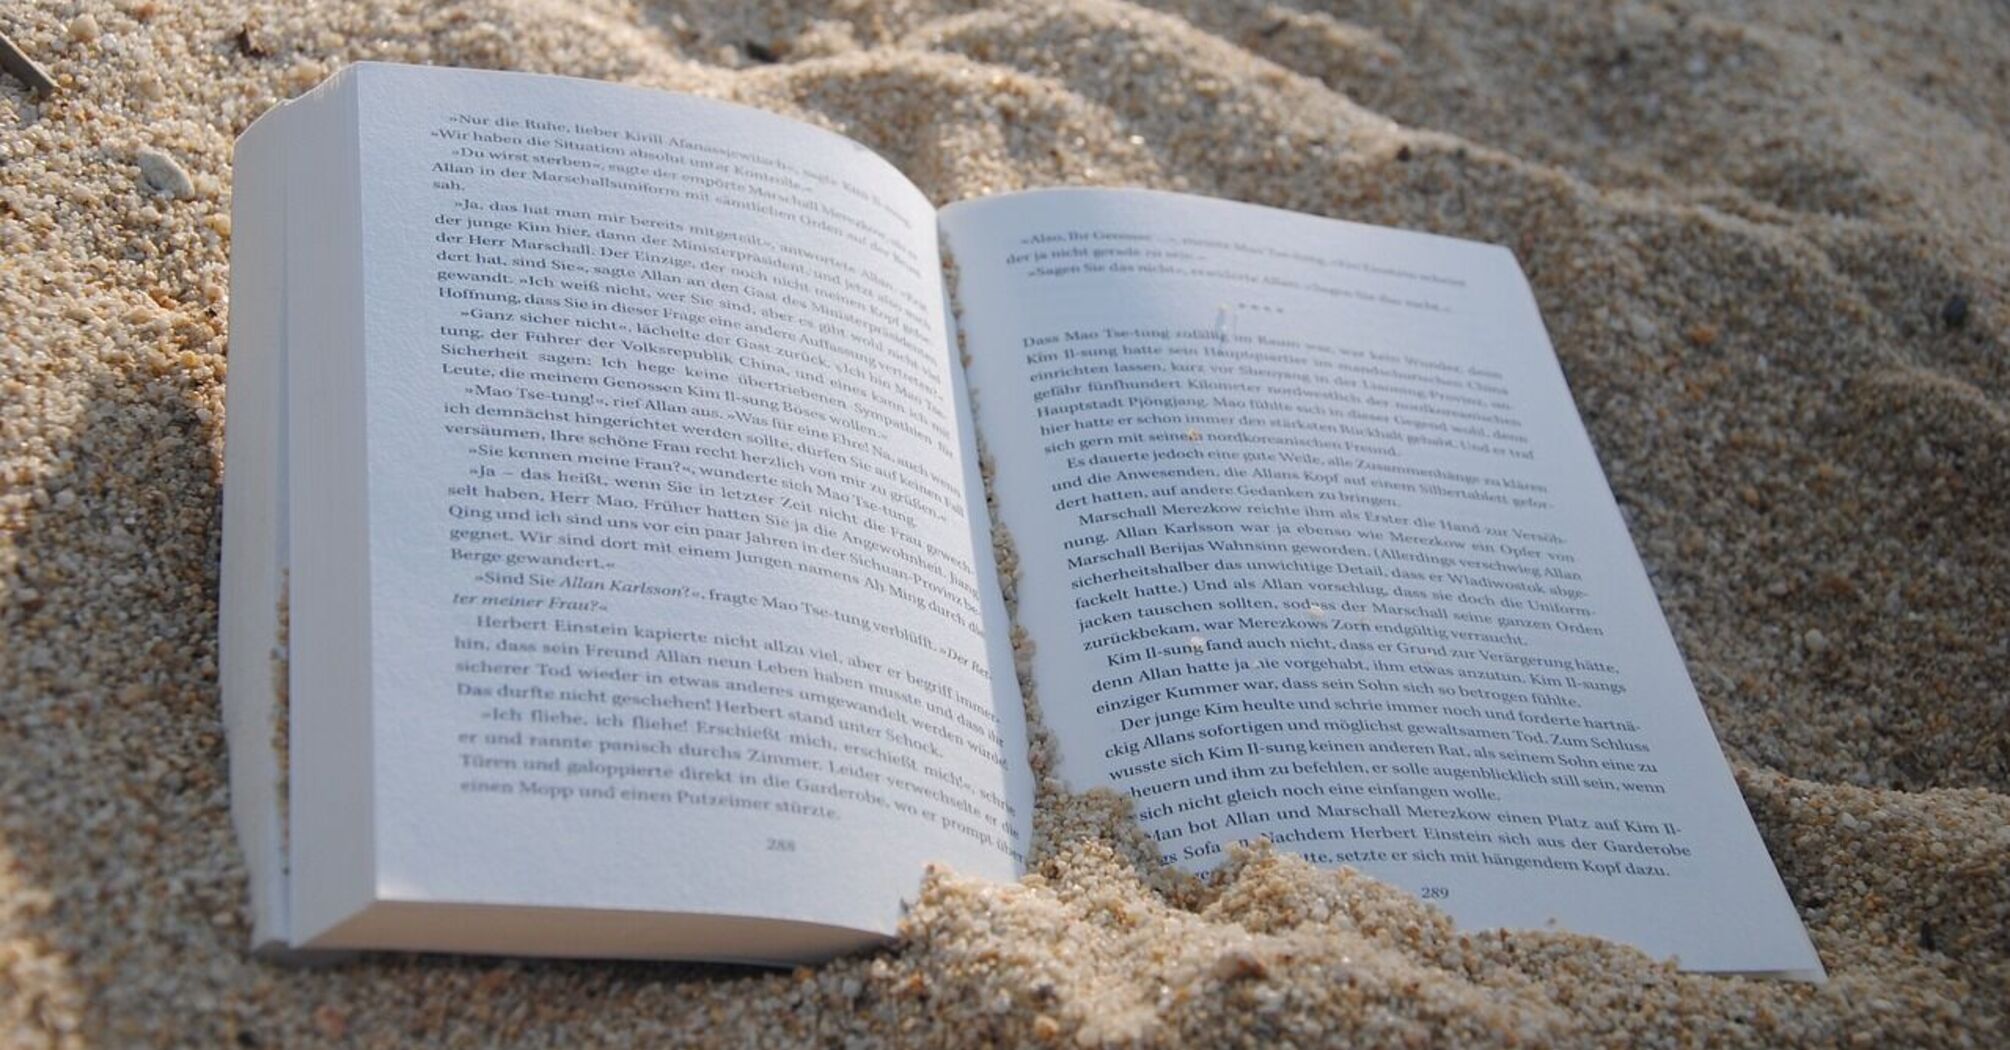 Best summer books to read: TOP 12 books worth reading this summer 